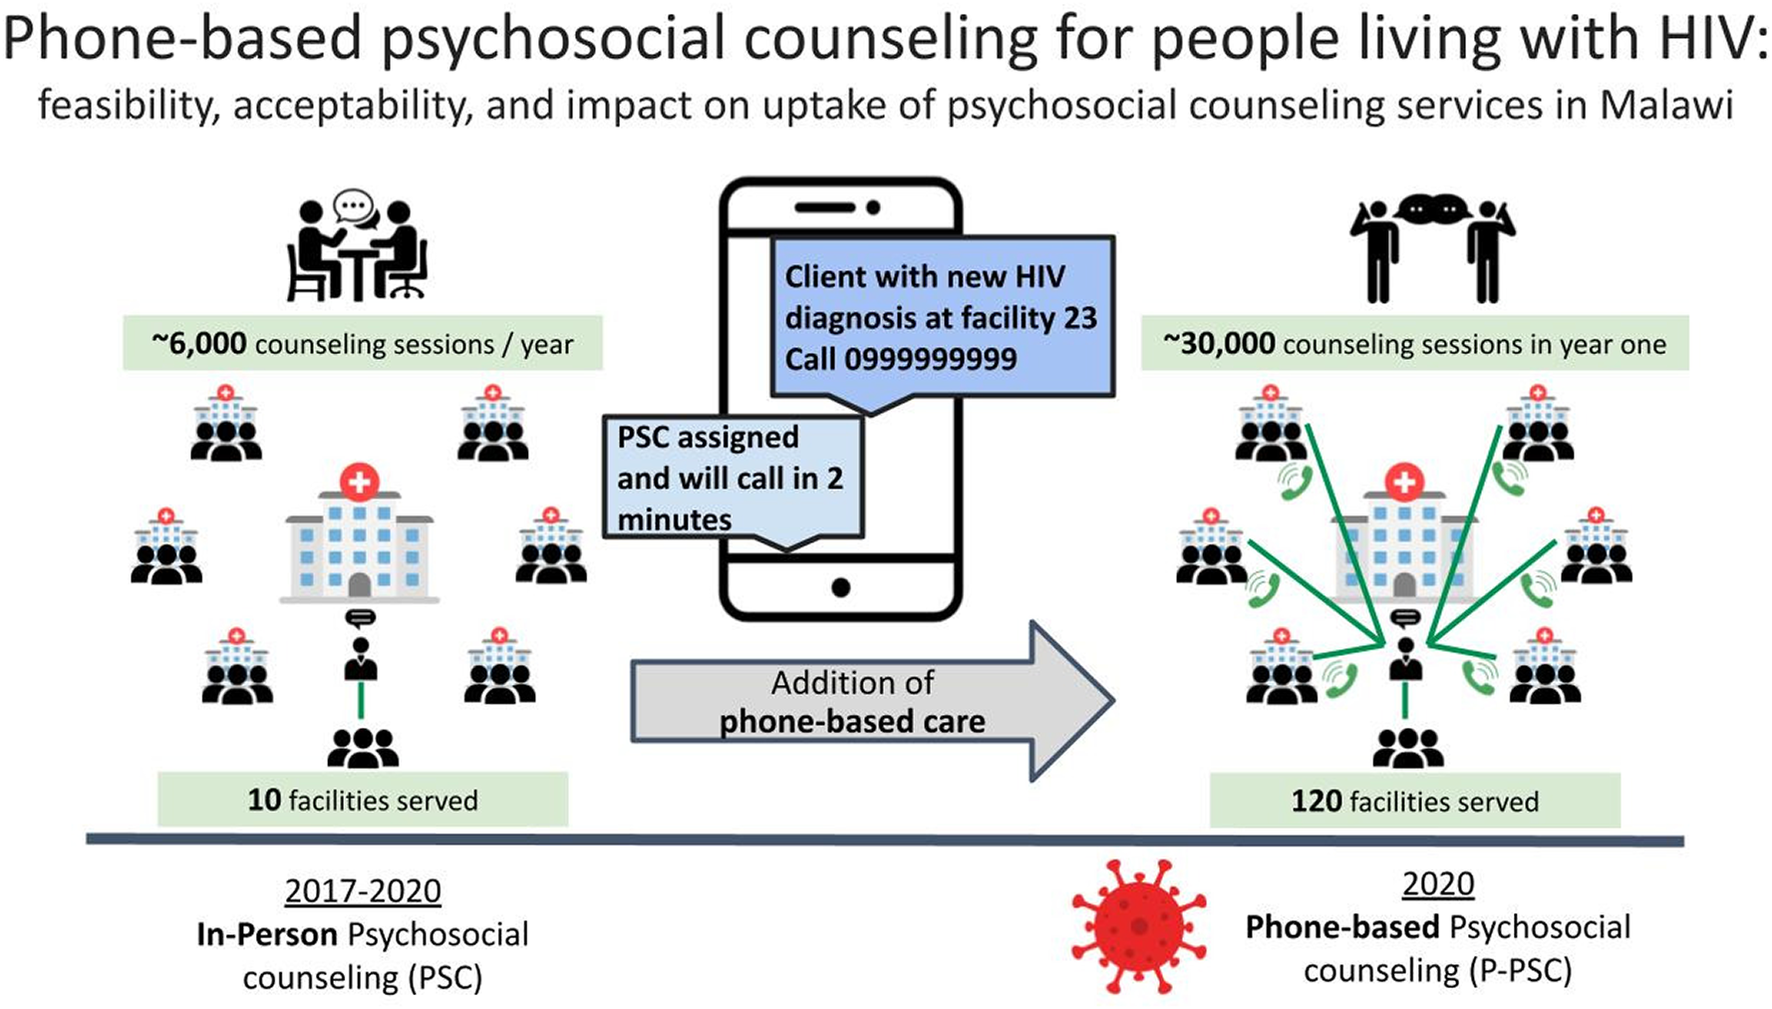 graphical abstract for Phone-based psychosocial counseling for people living with HIV: Feasibility, acceptability and impact on uptake of psychosocial counseling services in Malawi - open in full screen